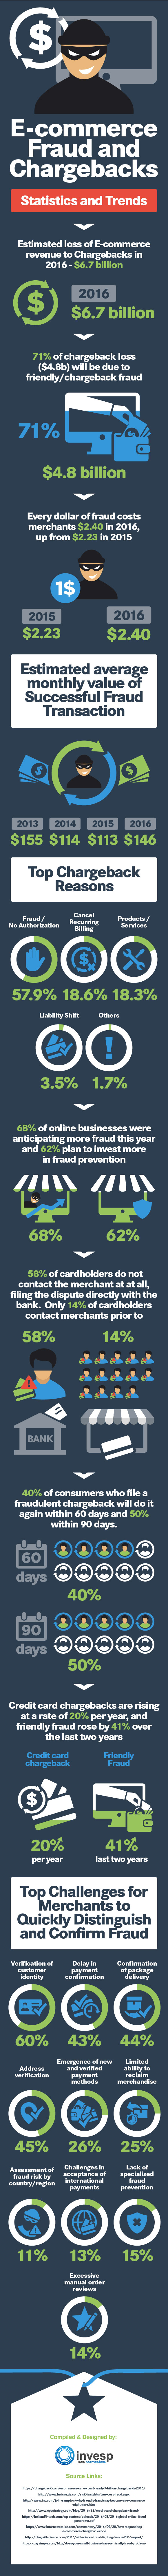 Ecommerce Fraud and Chargeback - Statistics and Trends